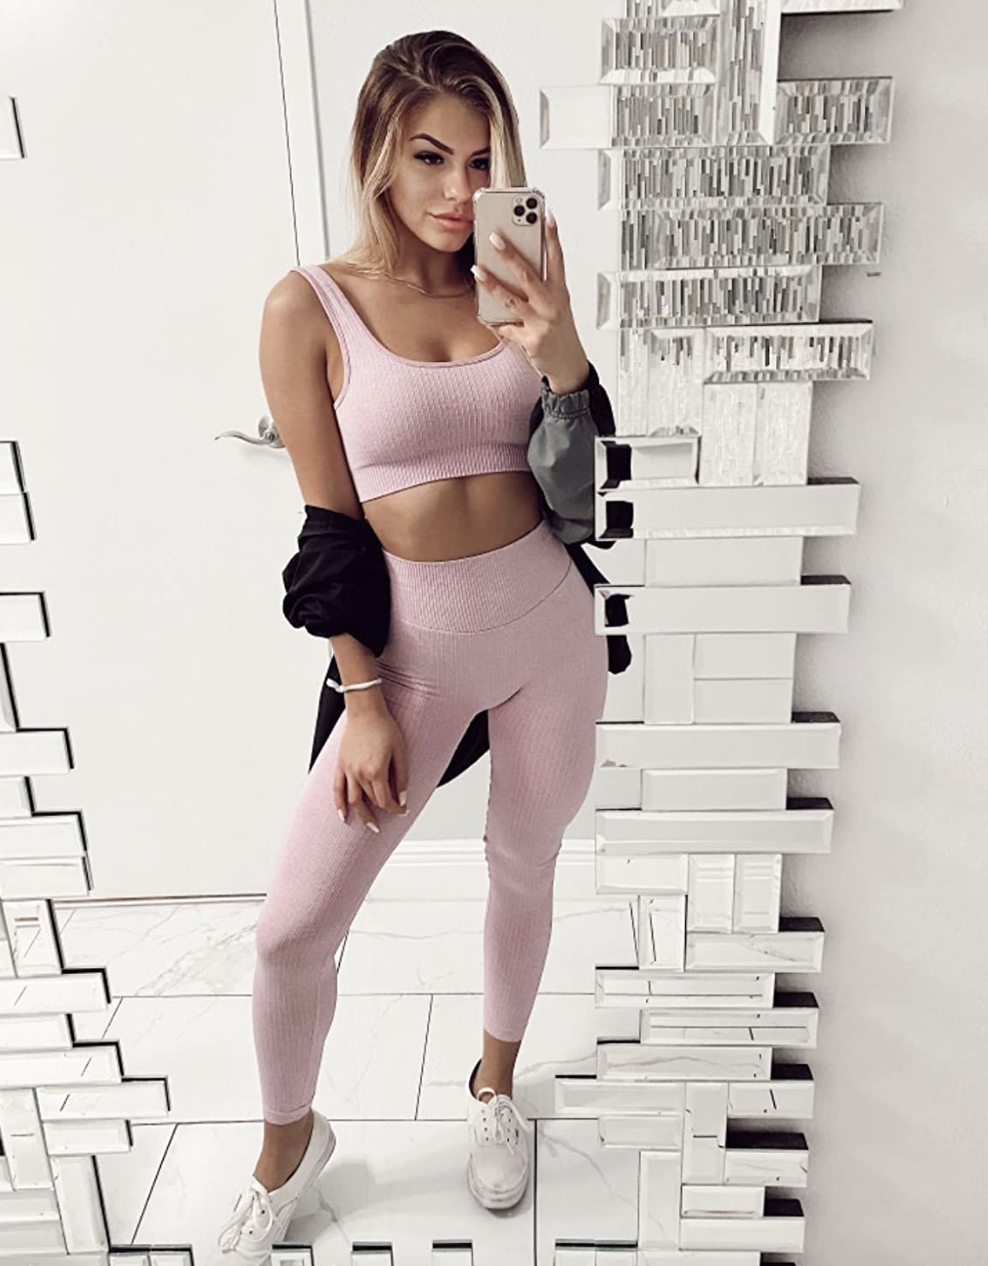 reviewer wearing the pink leggings and sports bra